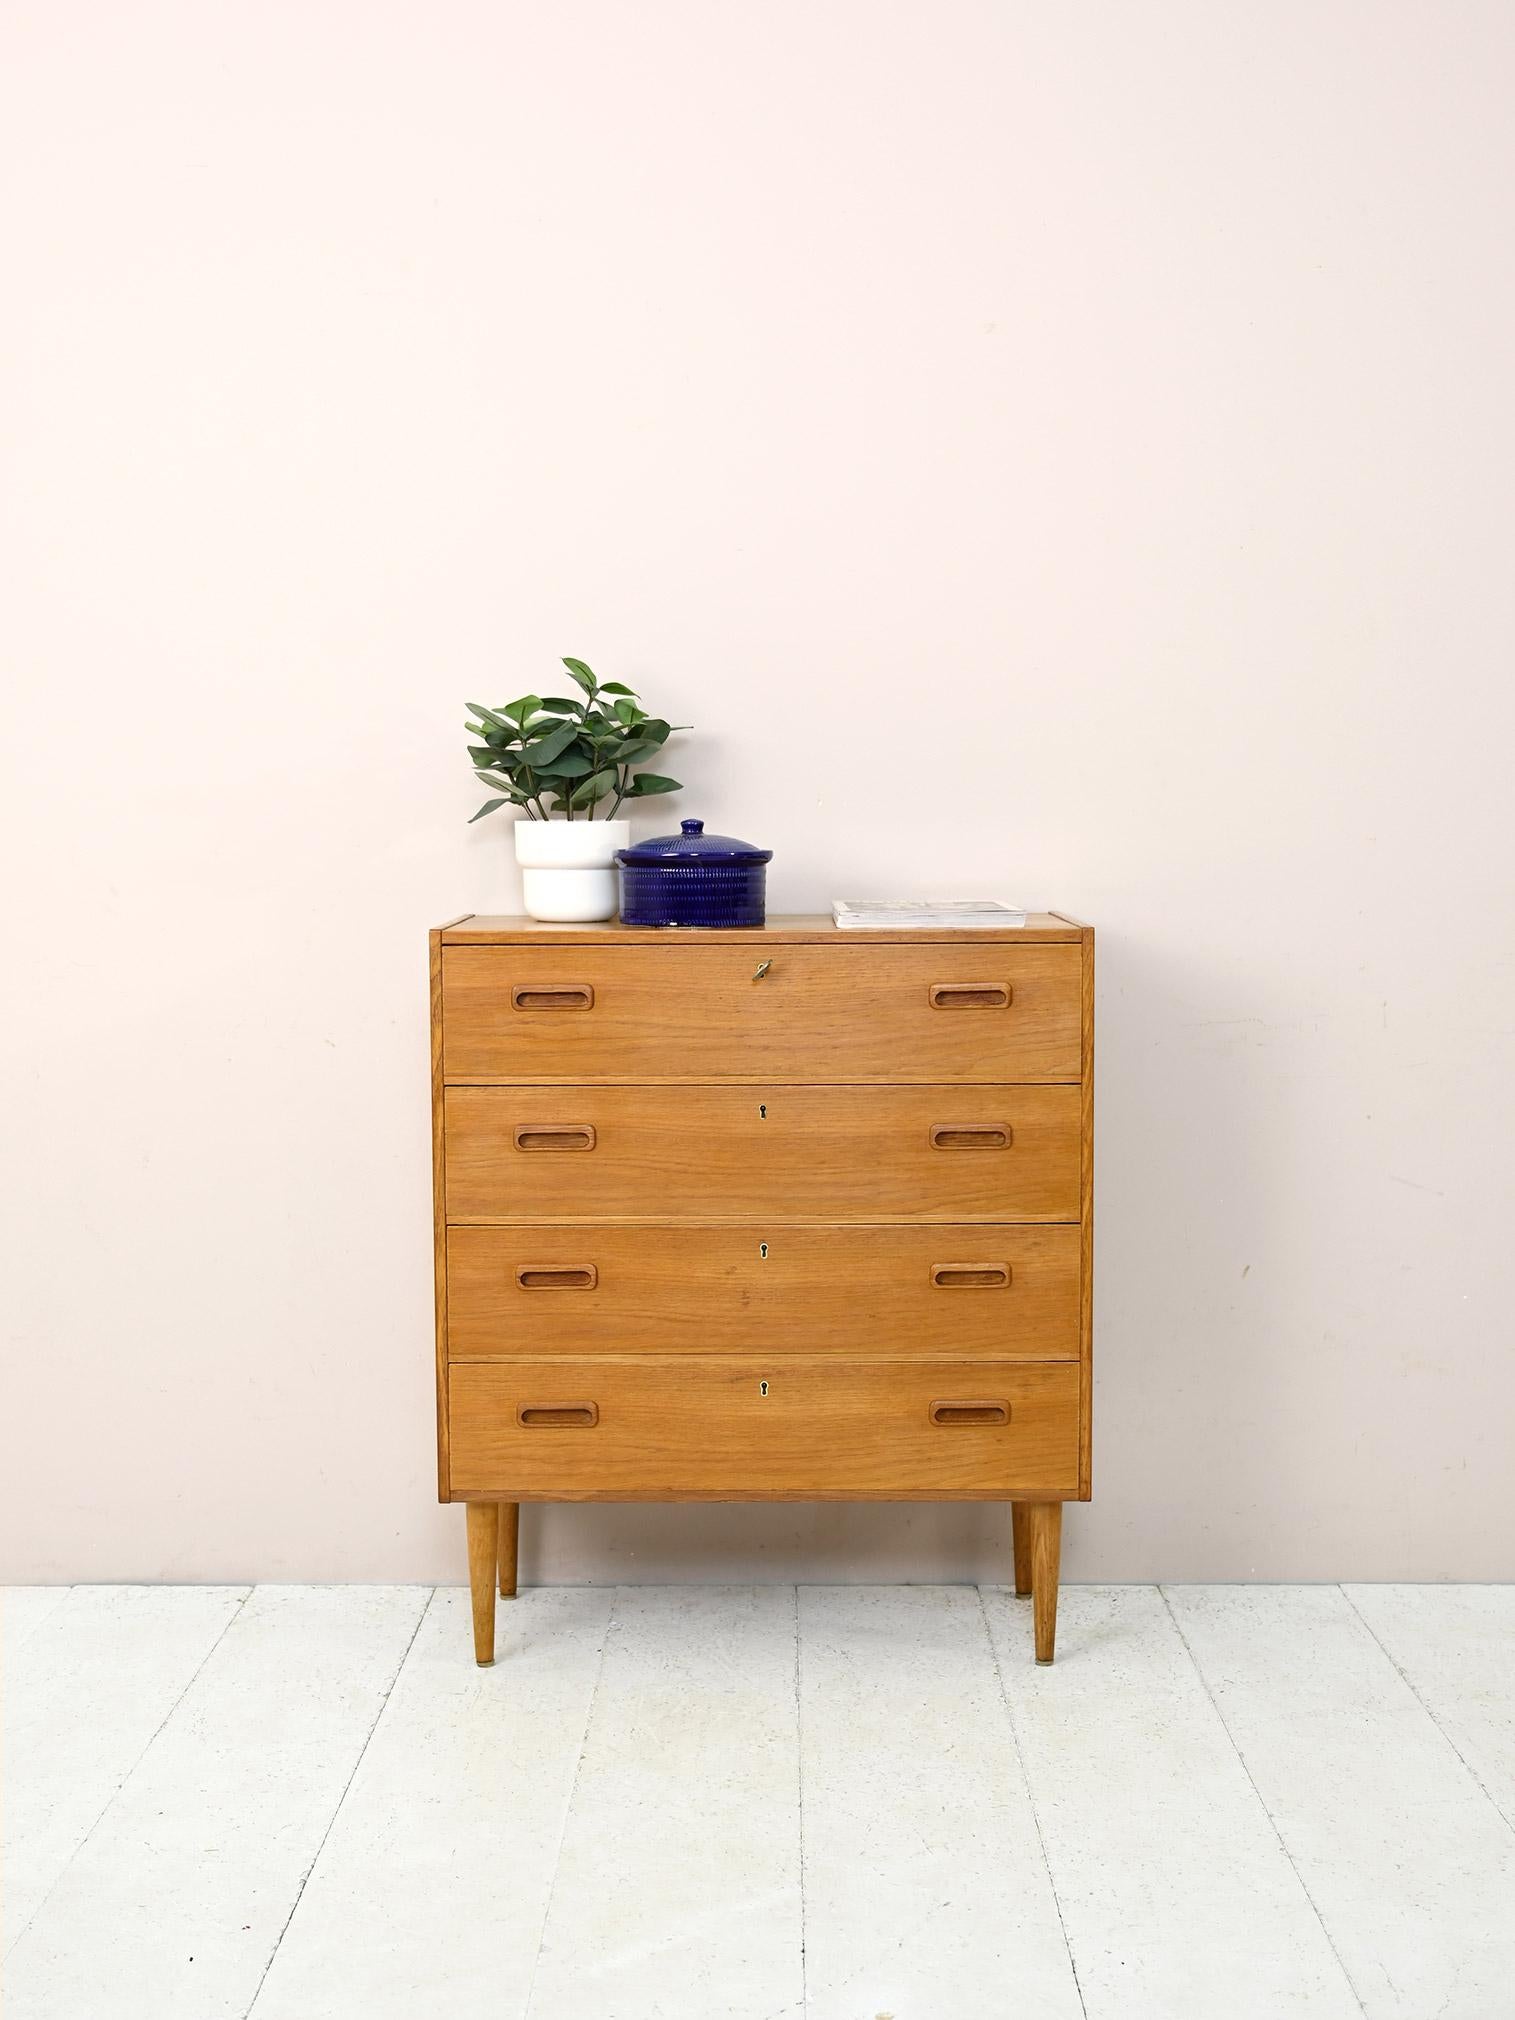 Swedish modern antique cabinet with drawers.

Scandinavian chest of drawers with 4 drawers, original 1960s teak.
The frame is simple and square in contrast to the curved handle of the carved wooden handles and tapered legs.
The lockable drawers